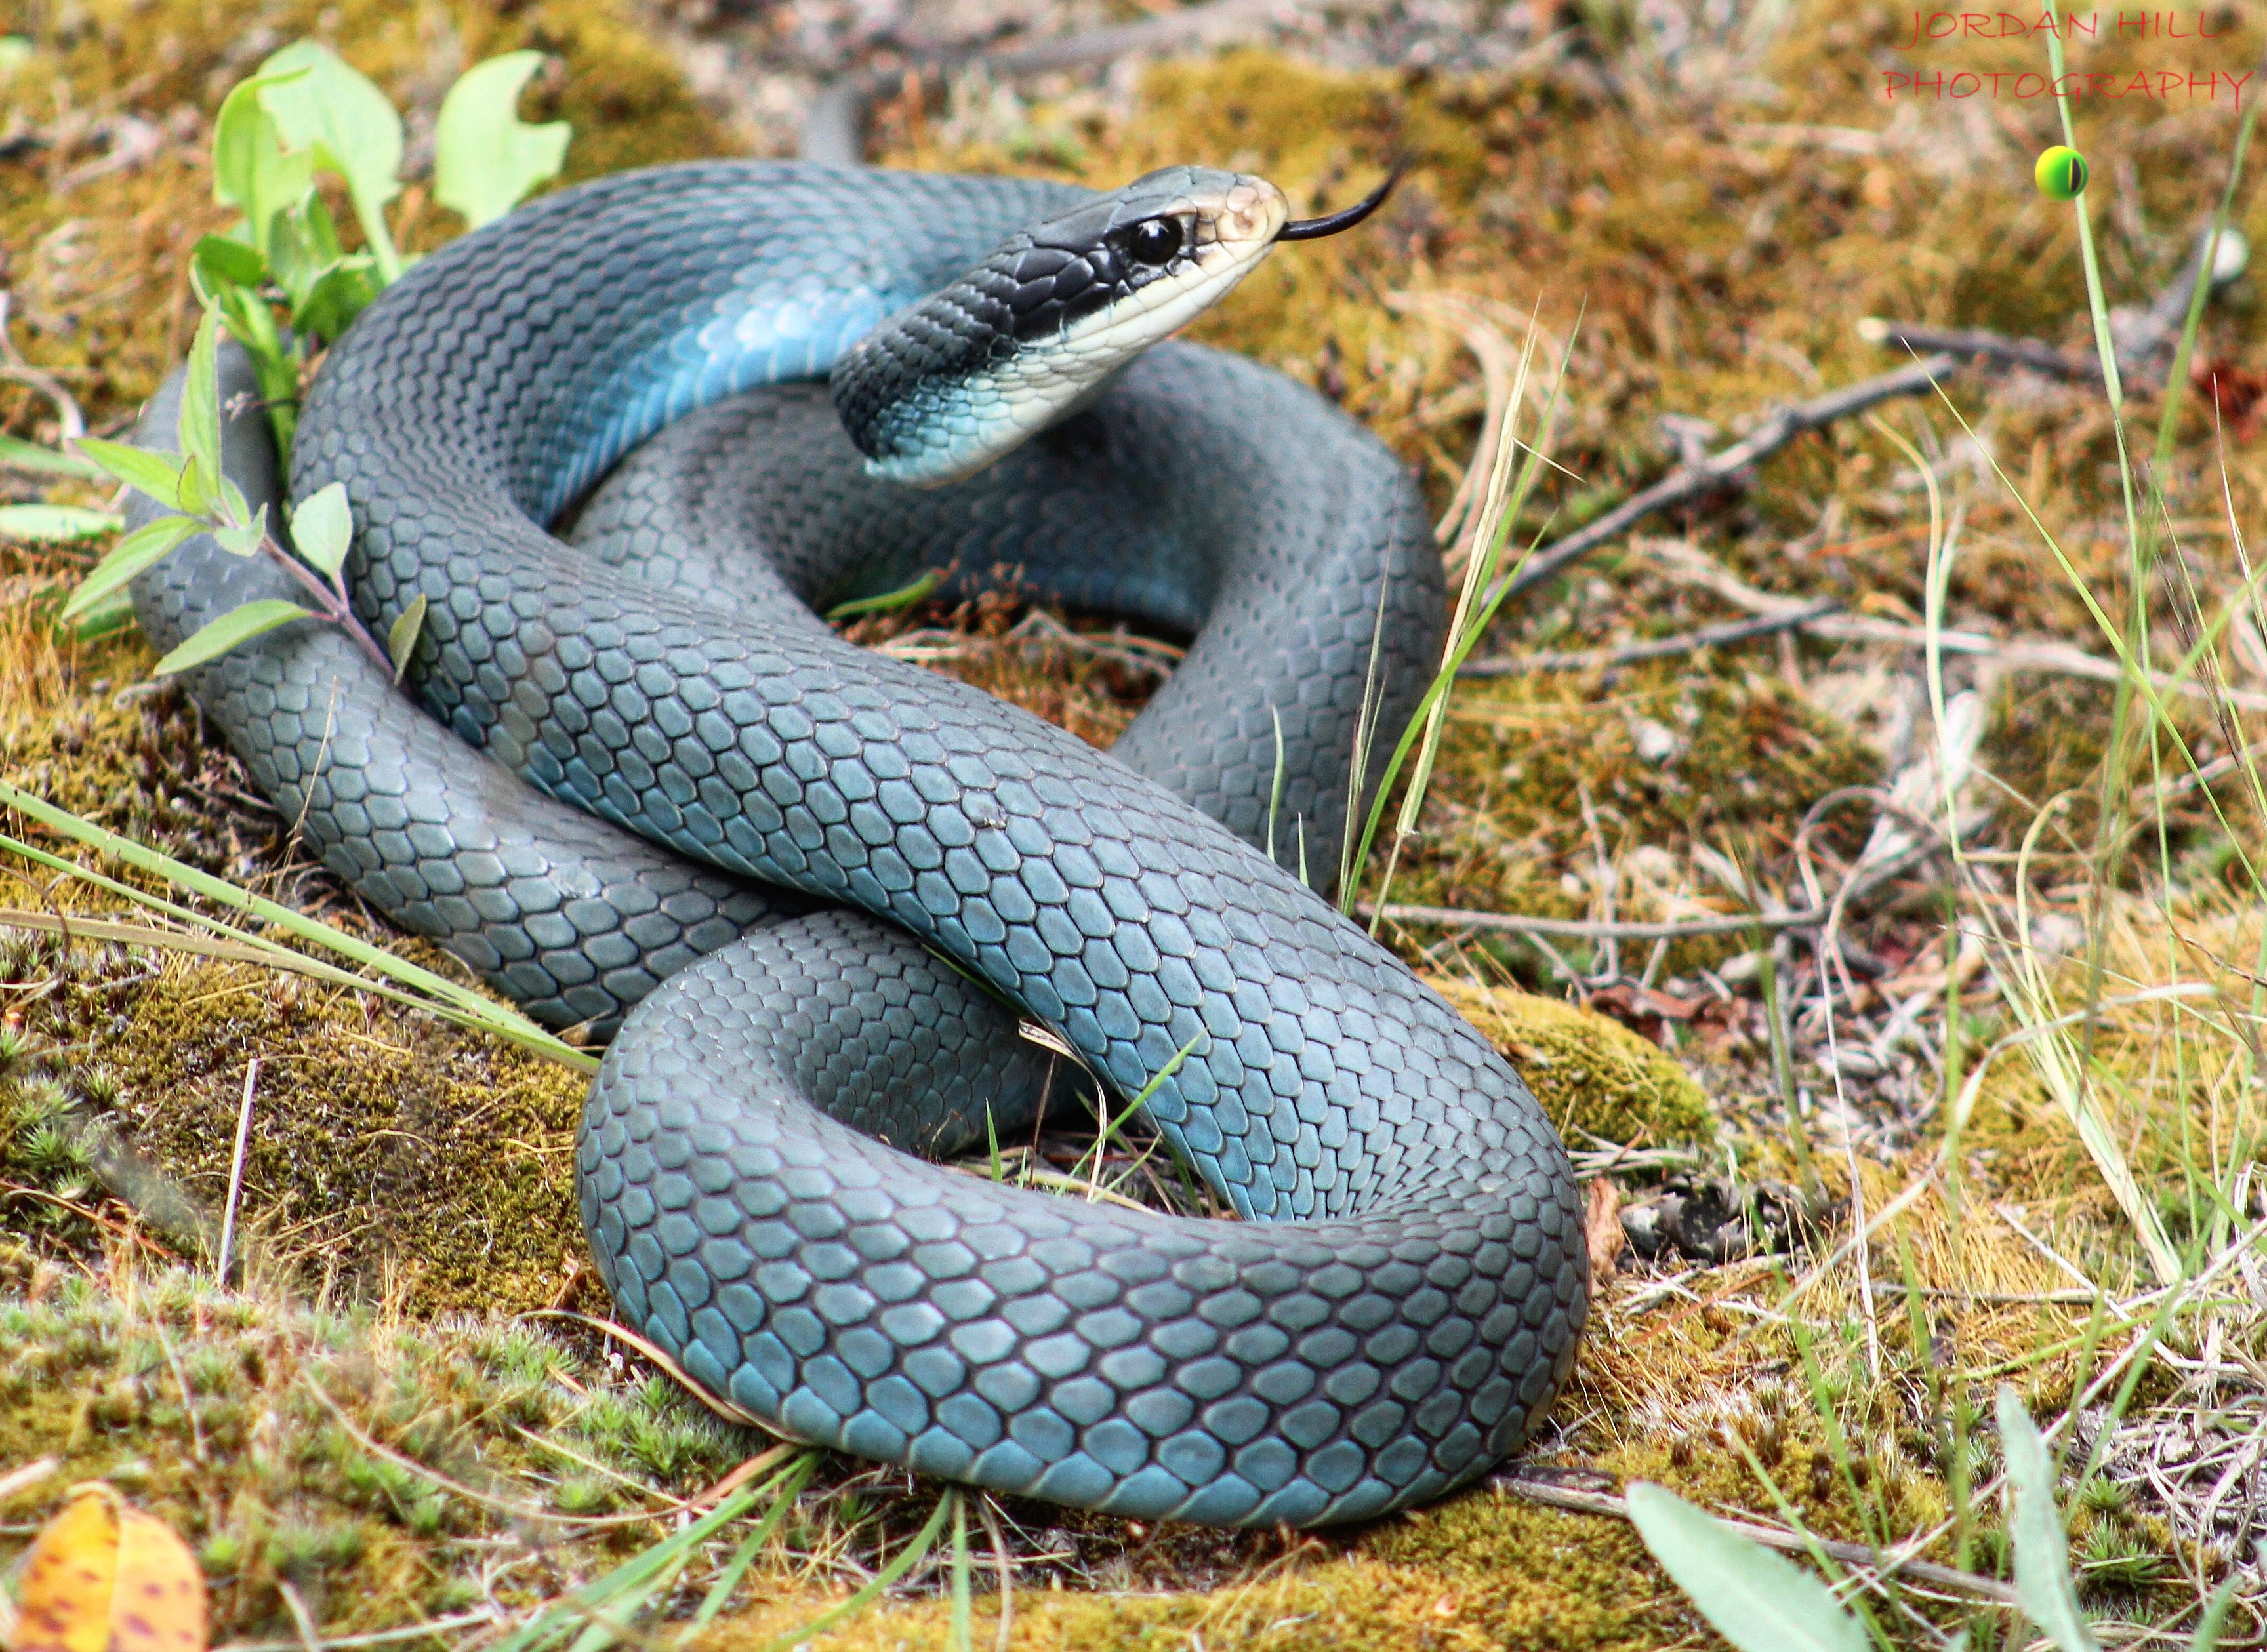 Blue racer snake guide: how to identify, are they venomous, and